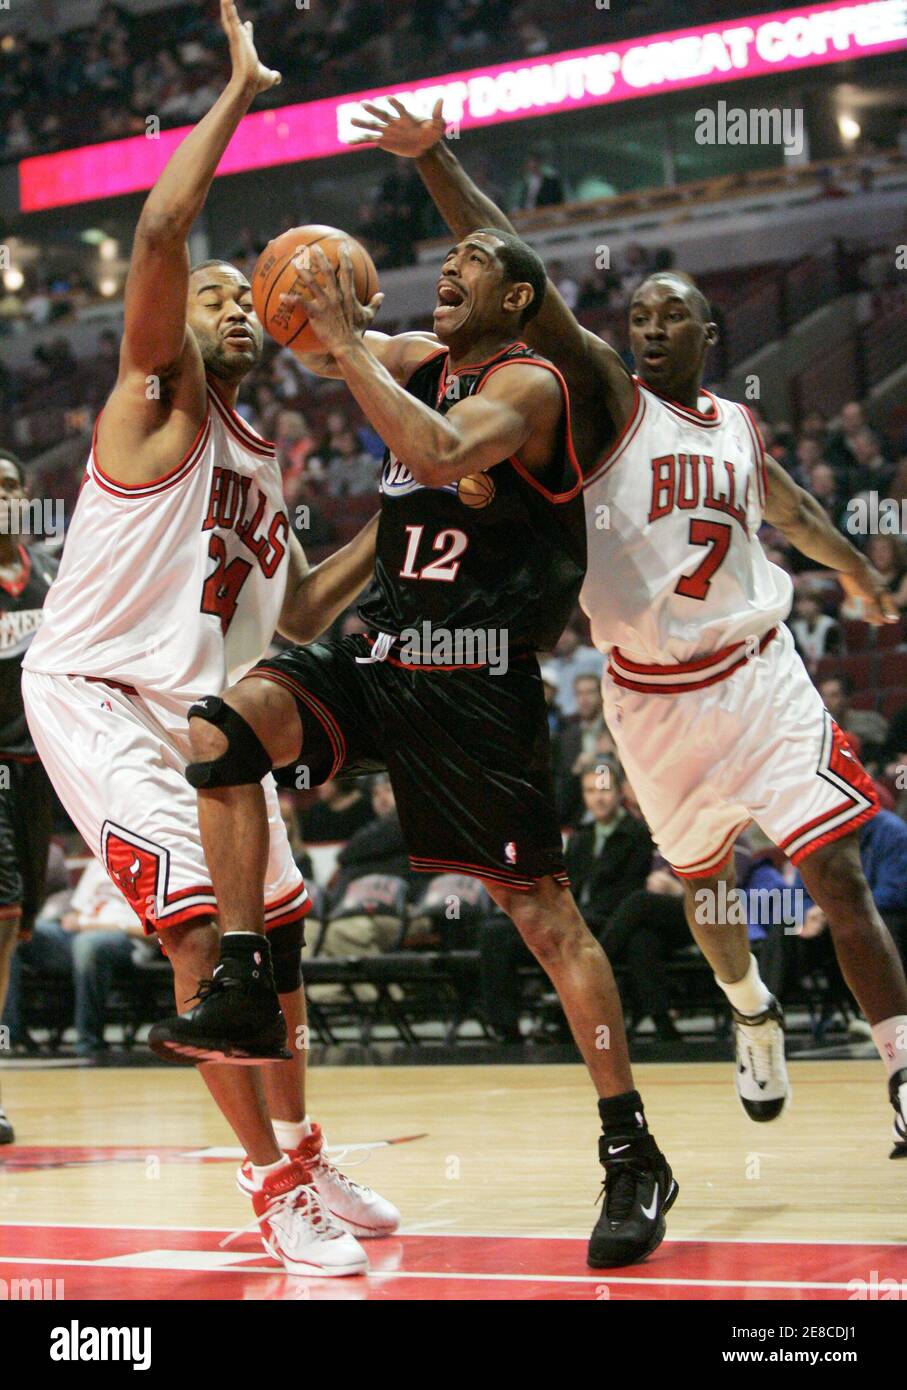 Philadelphia 76ers guard Kevin Ollie (C) drives between Chicago Bulls  Othella Harrington (L) and Ben Gordon during the first half of their NBA  game in Chicago, Illinois February 16, 2006. REUTERS/John Gress